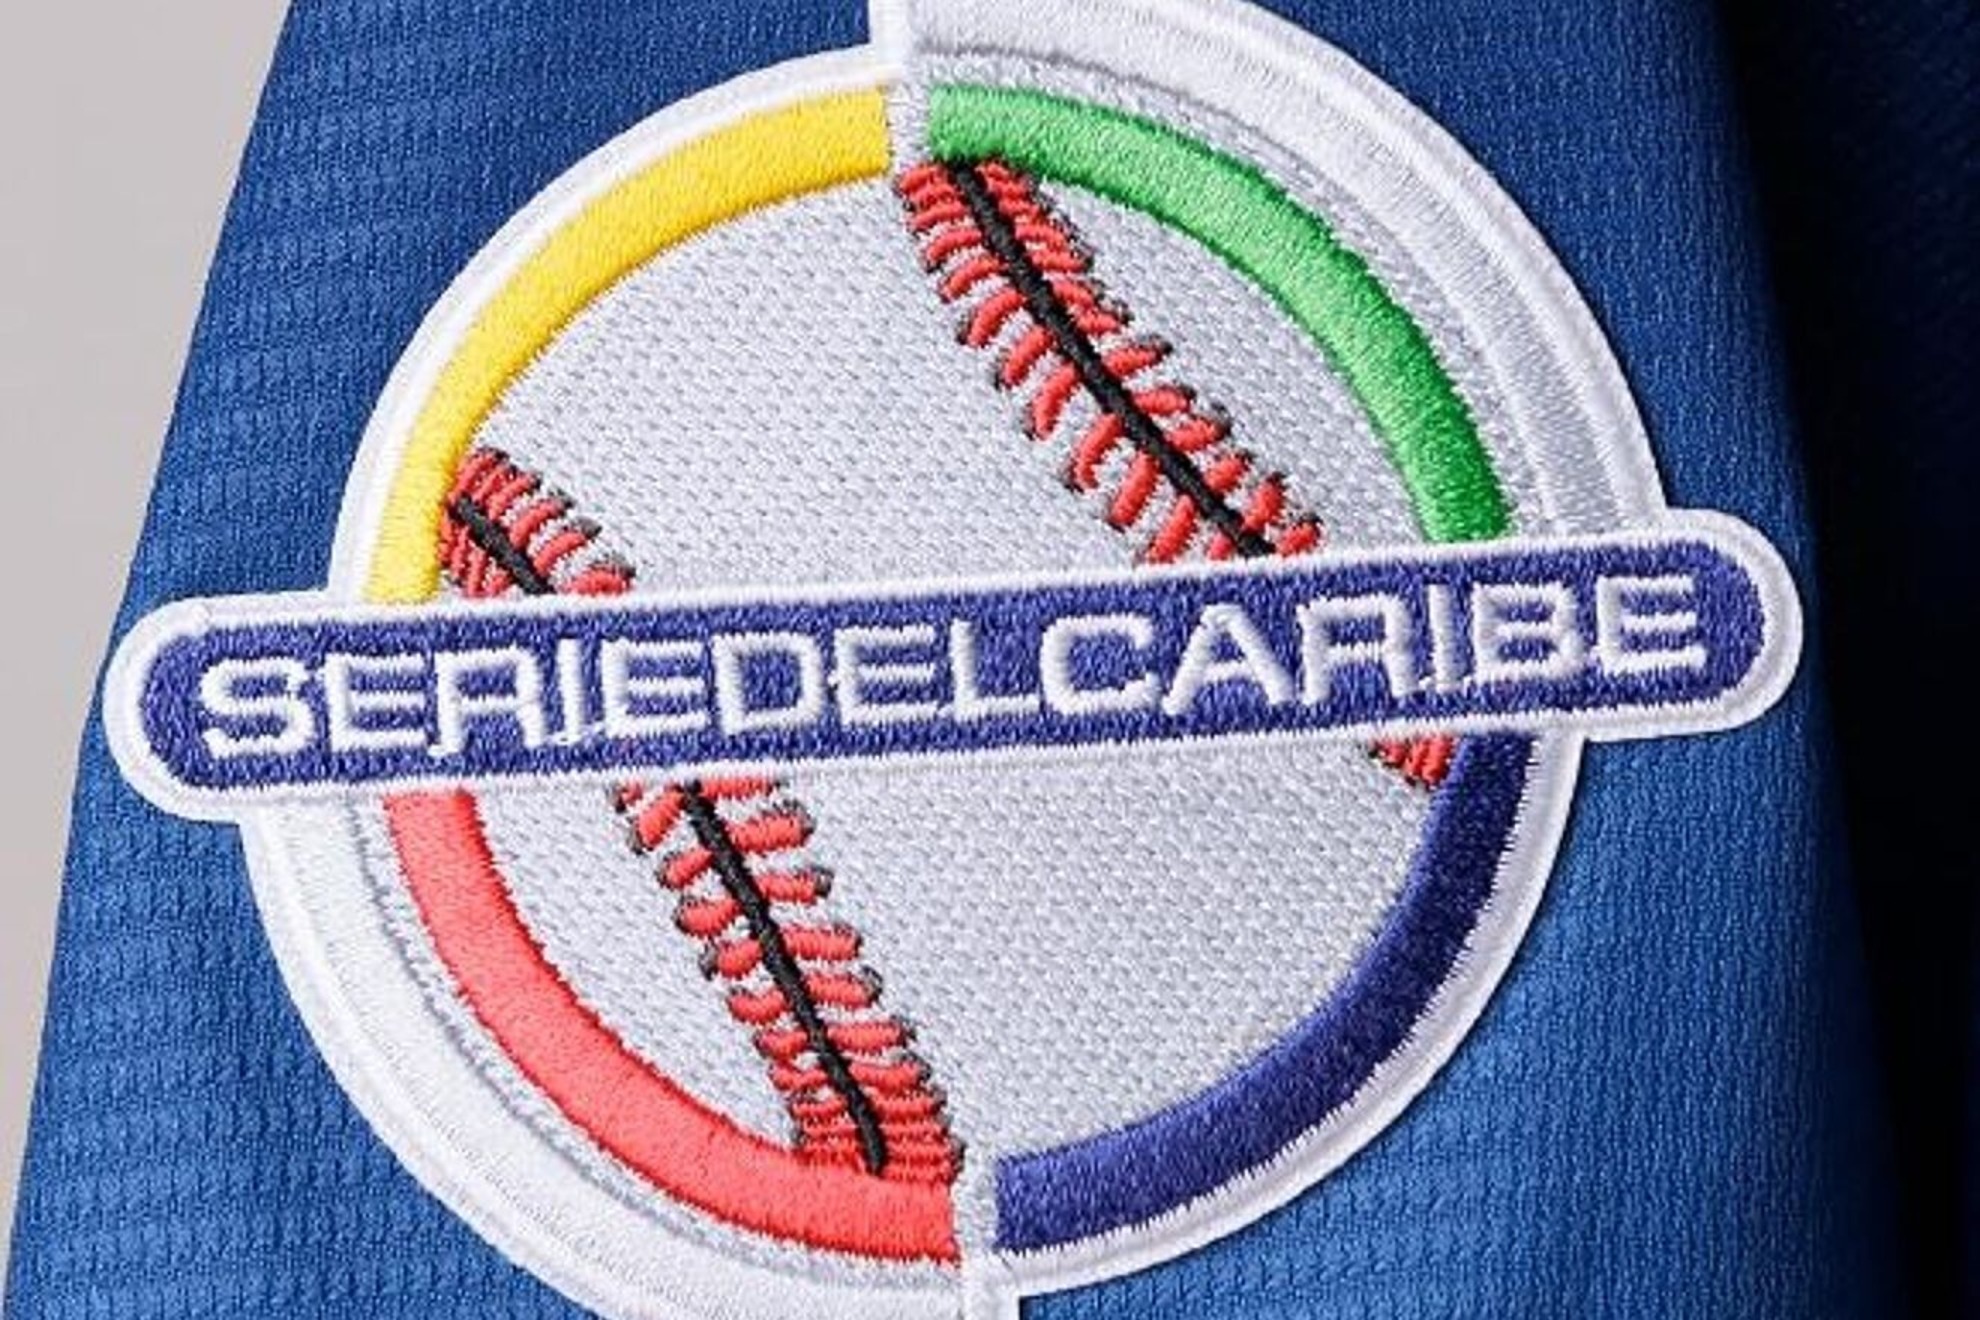 Caribbean Series 2024 Venue: In which country will this amazing baseball event be held this year?